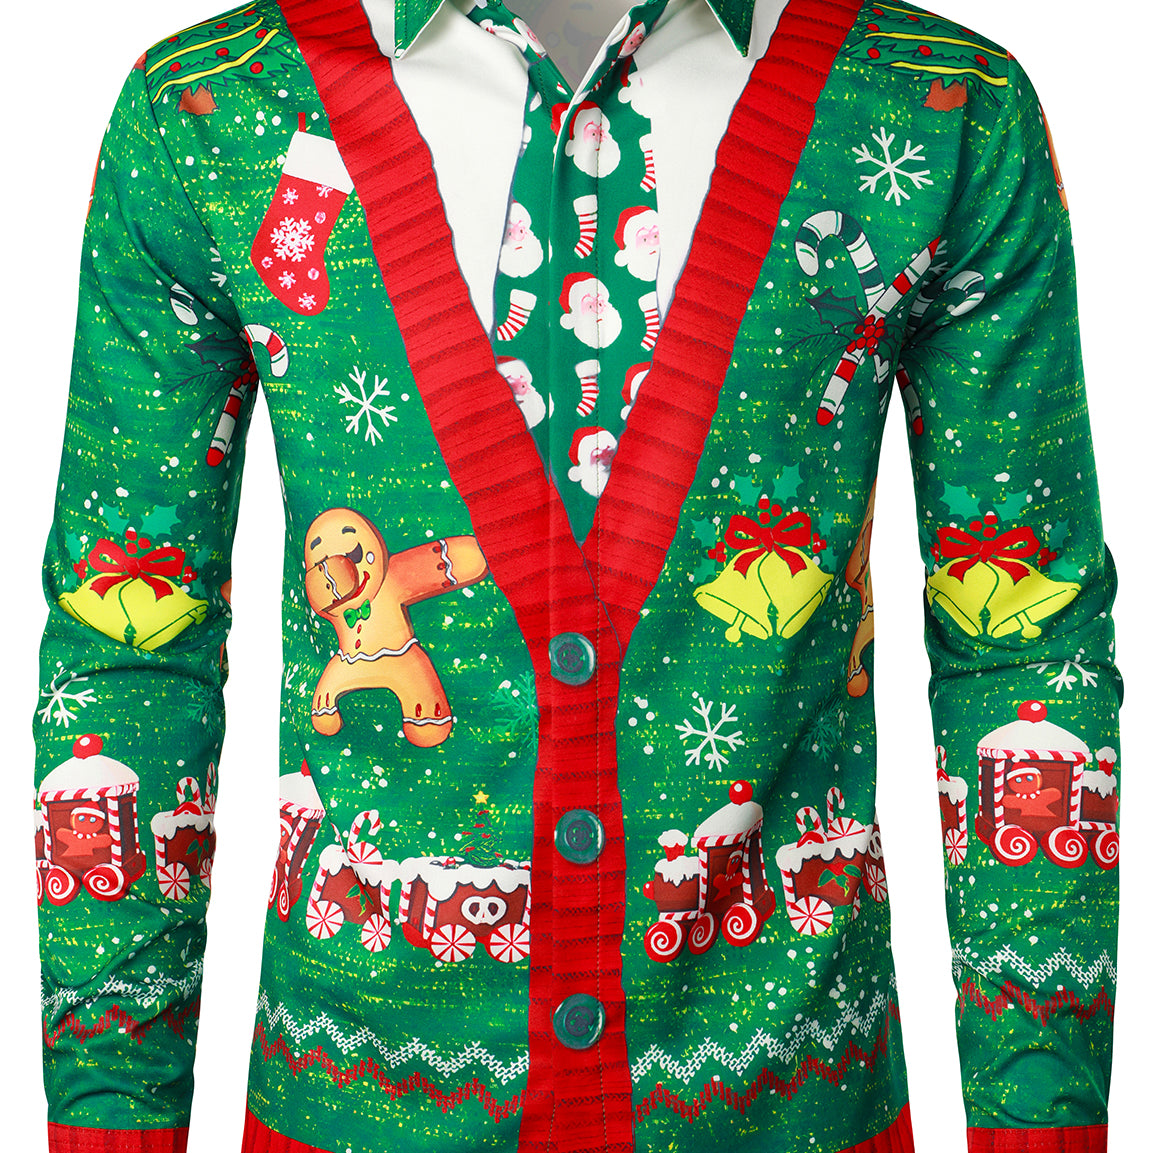 Men's Christmas Crackers Bell Print Funny Outfit Themed Top Long Sleeve Shirt